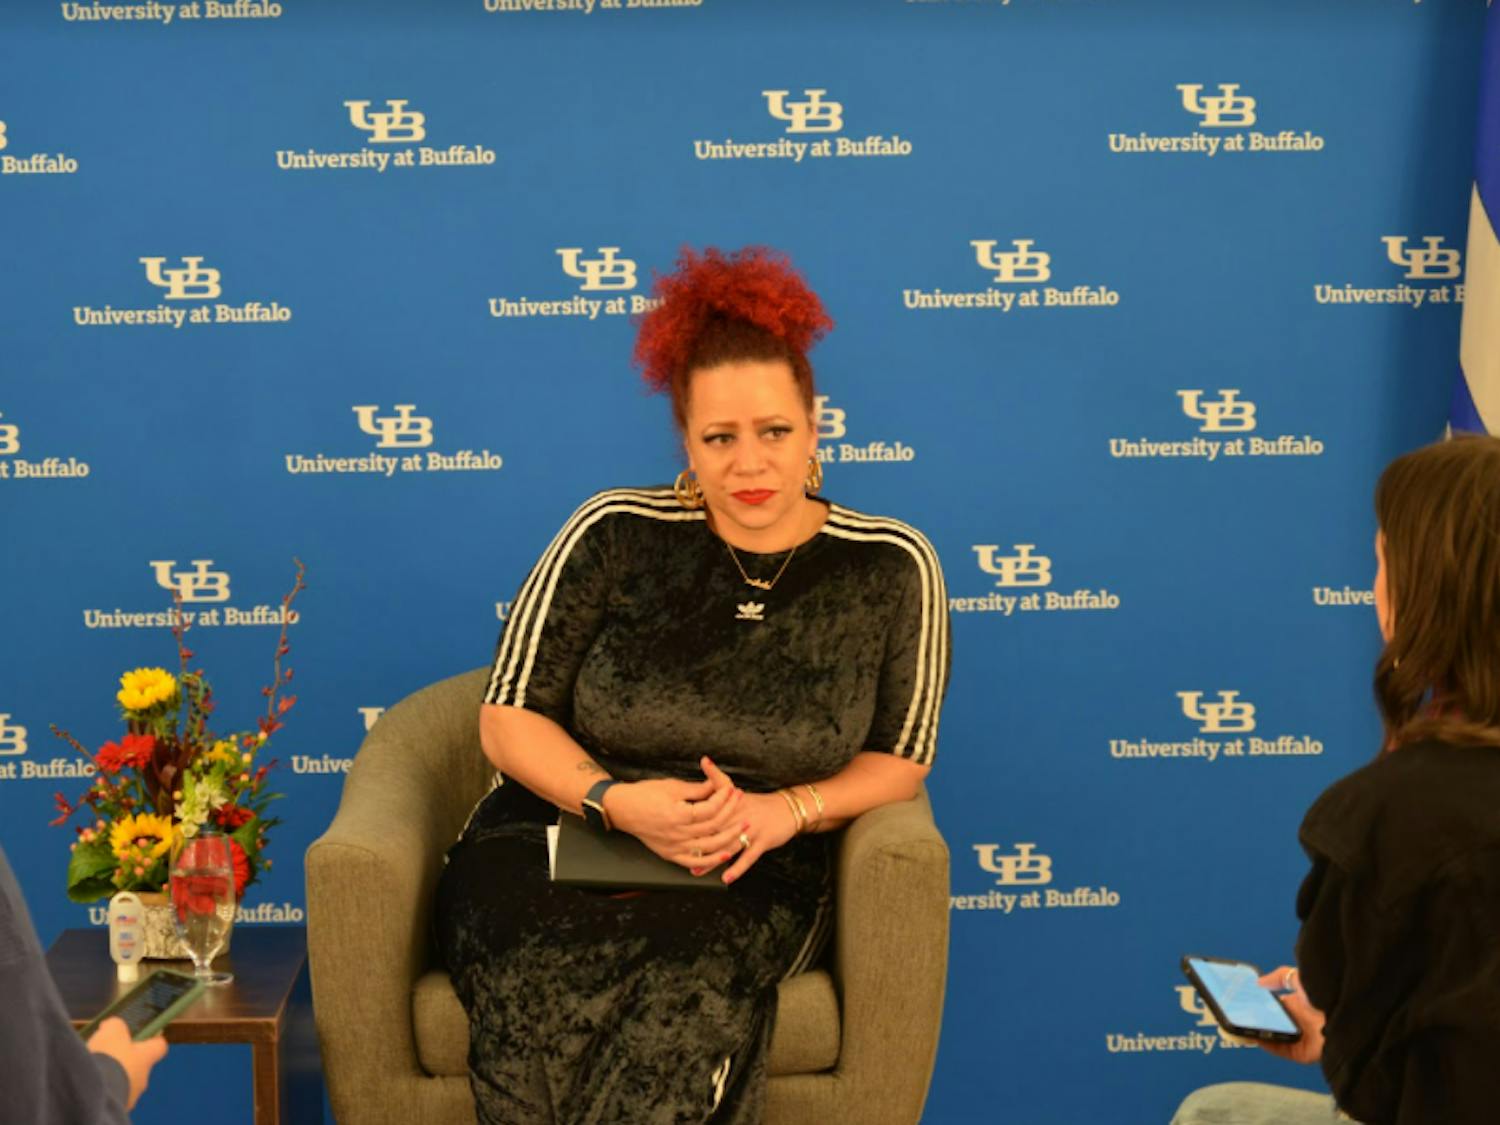 Pulitzer Prize-winning journalist Nikole Hannah-Jones spoke at the Center for the Arts Wednesday as part of the Distinguished Speakers Series.